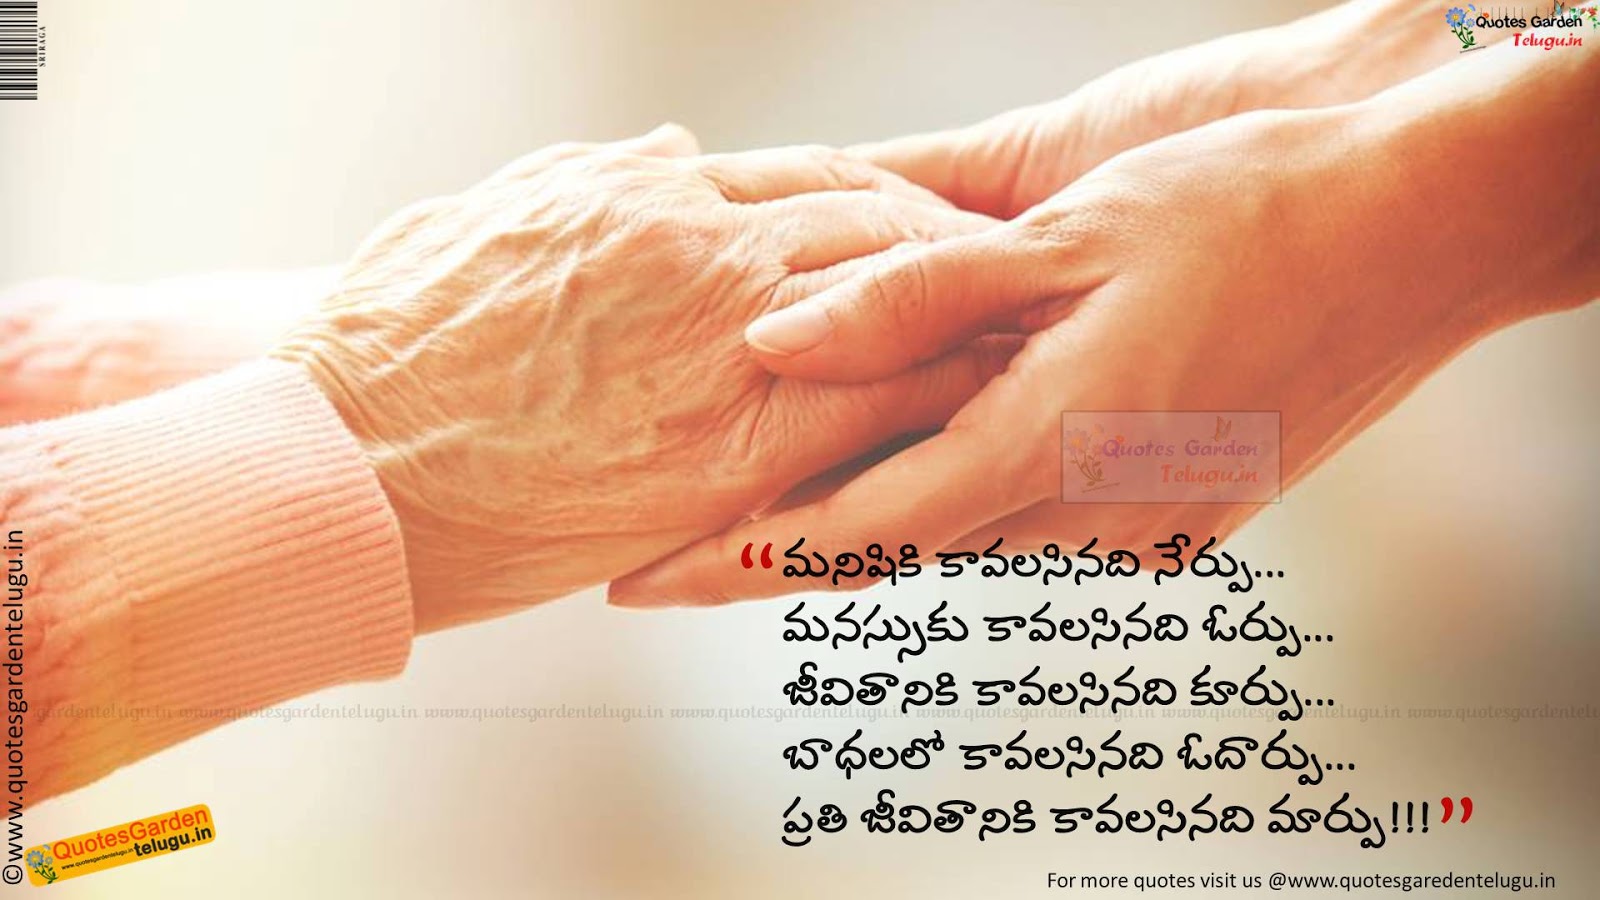 Best Telugu good morning Quotes with hd wallpapers | QUOTES GARDEN ...